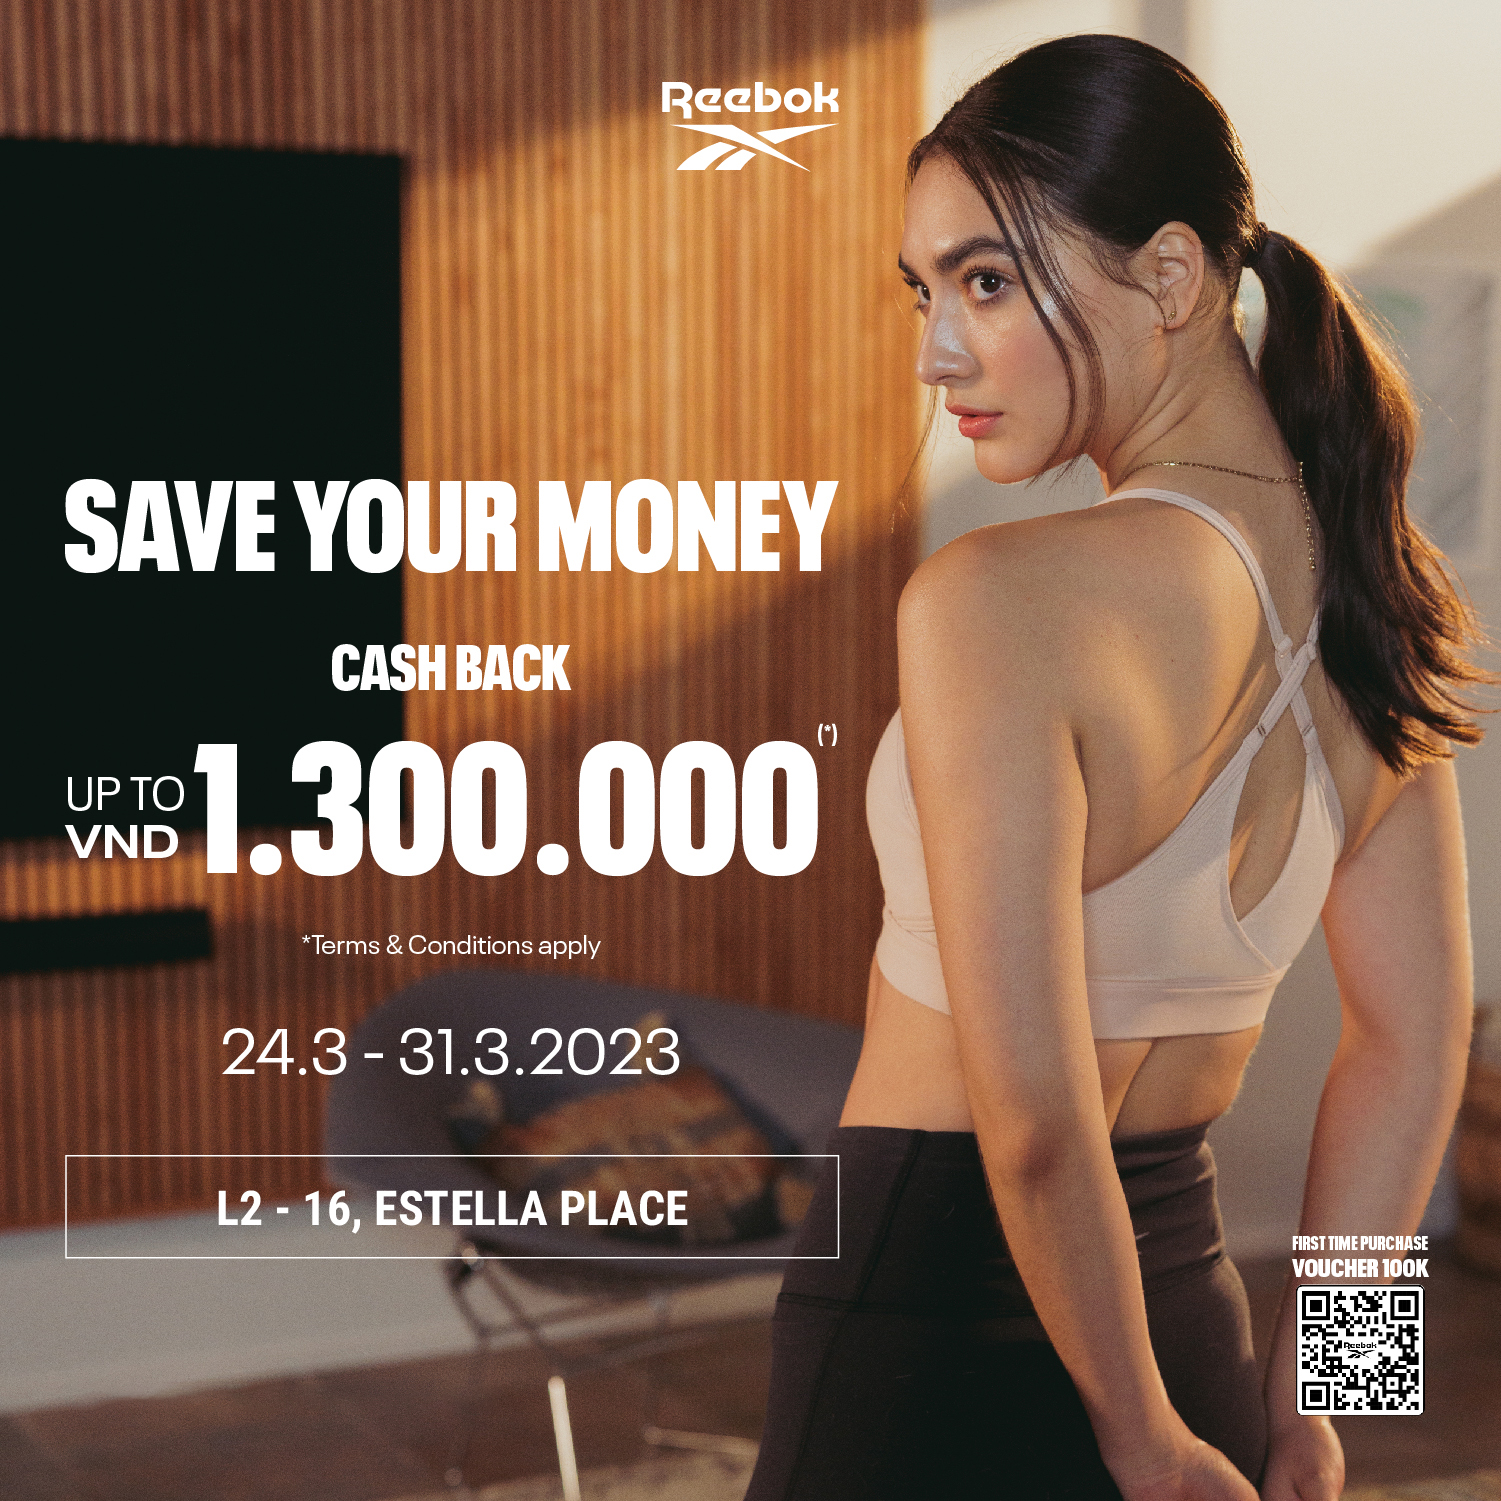 THE HOTTEST CASHBACK HAS COME BACK - SAVE UP TO 1.300.000Đ